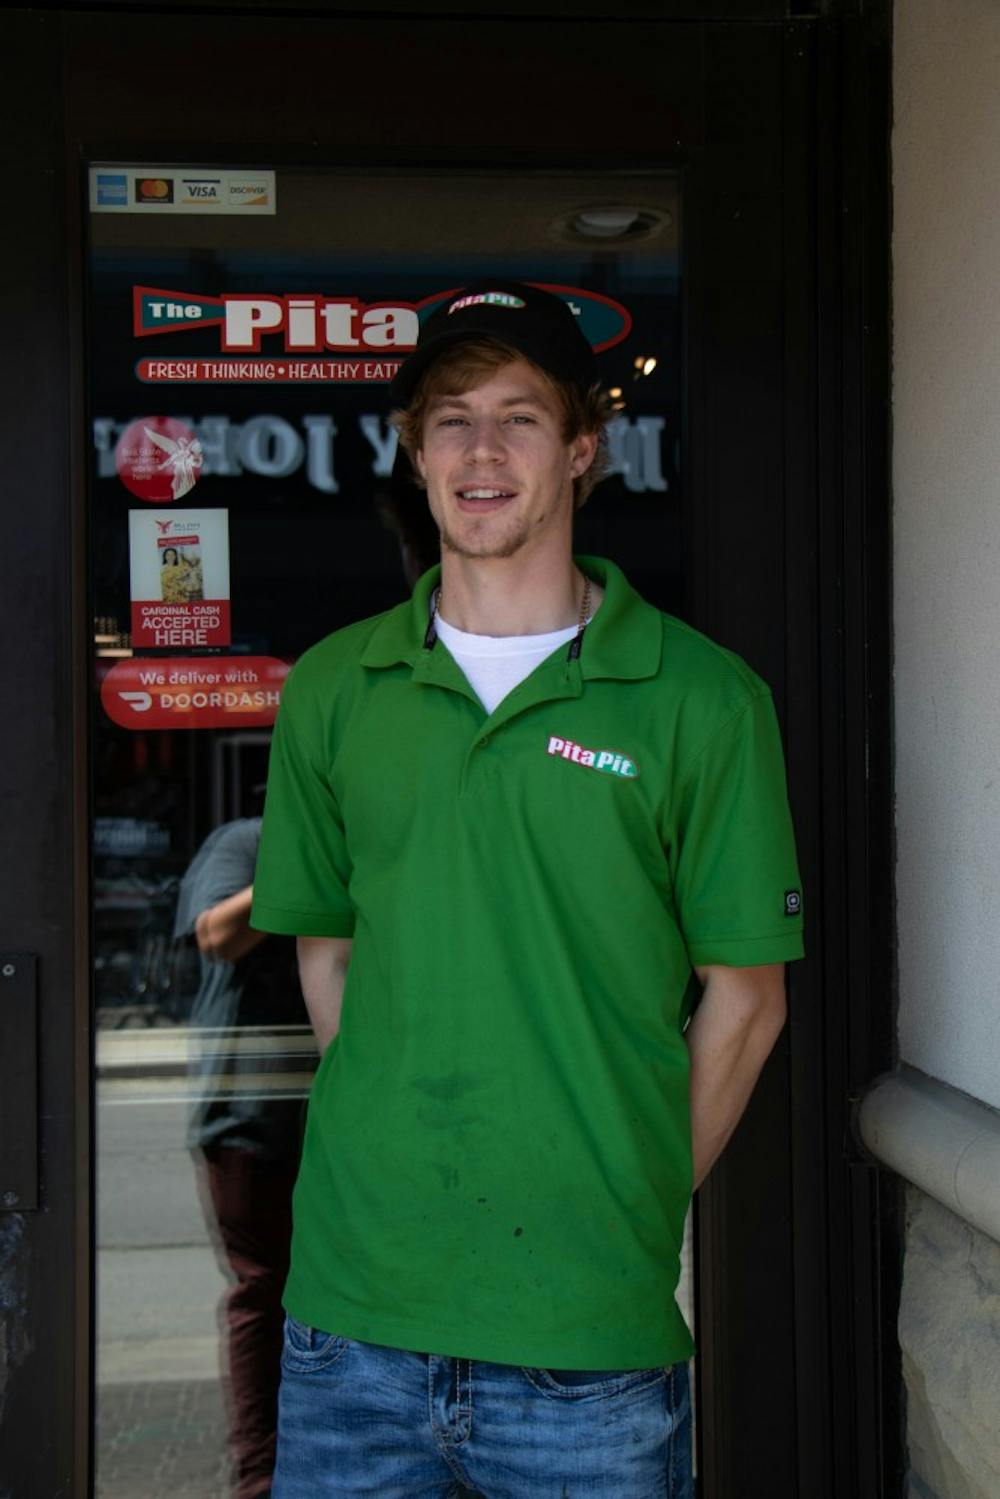 <p>Pita Pit owner, Dain Peters, stands in front of his new restaurant in The Village, Sept. 9, 2019. Peters owns multiple Pita Pits around the Midwest. <strong>Jacob Musselman, DN</strong></p>